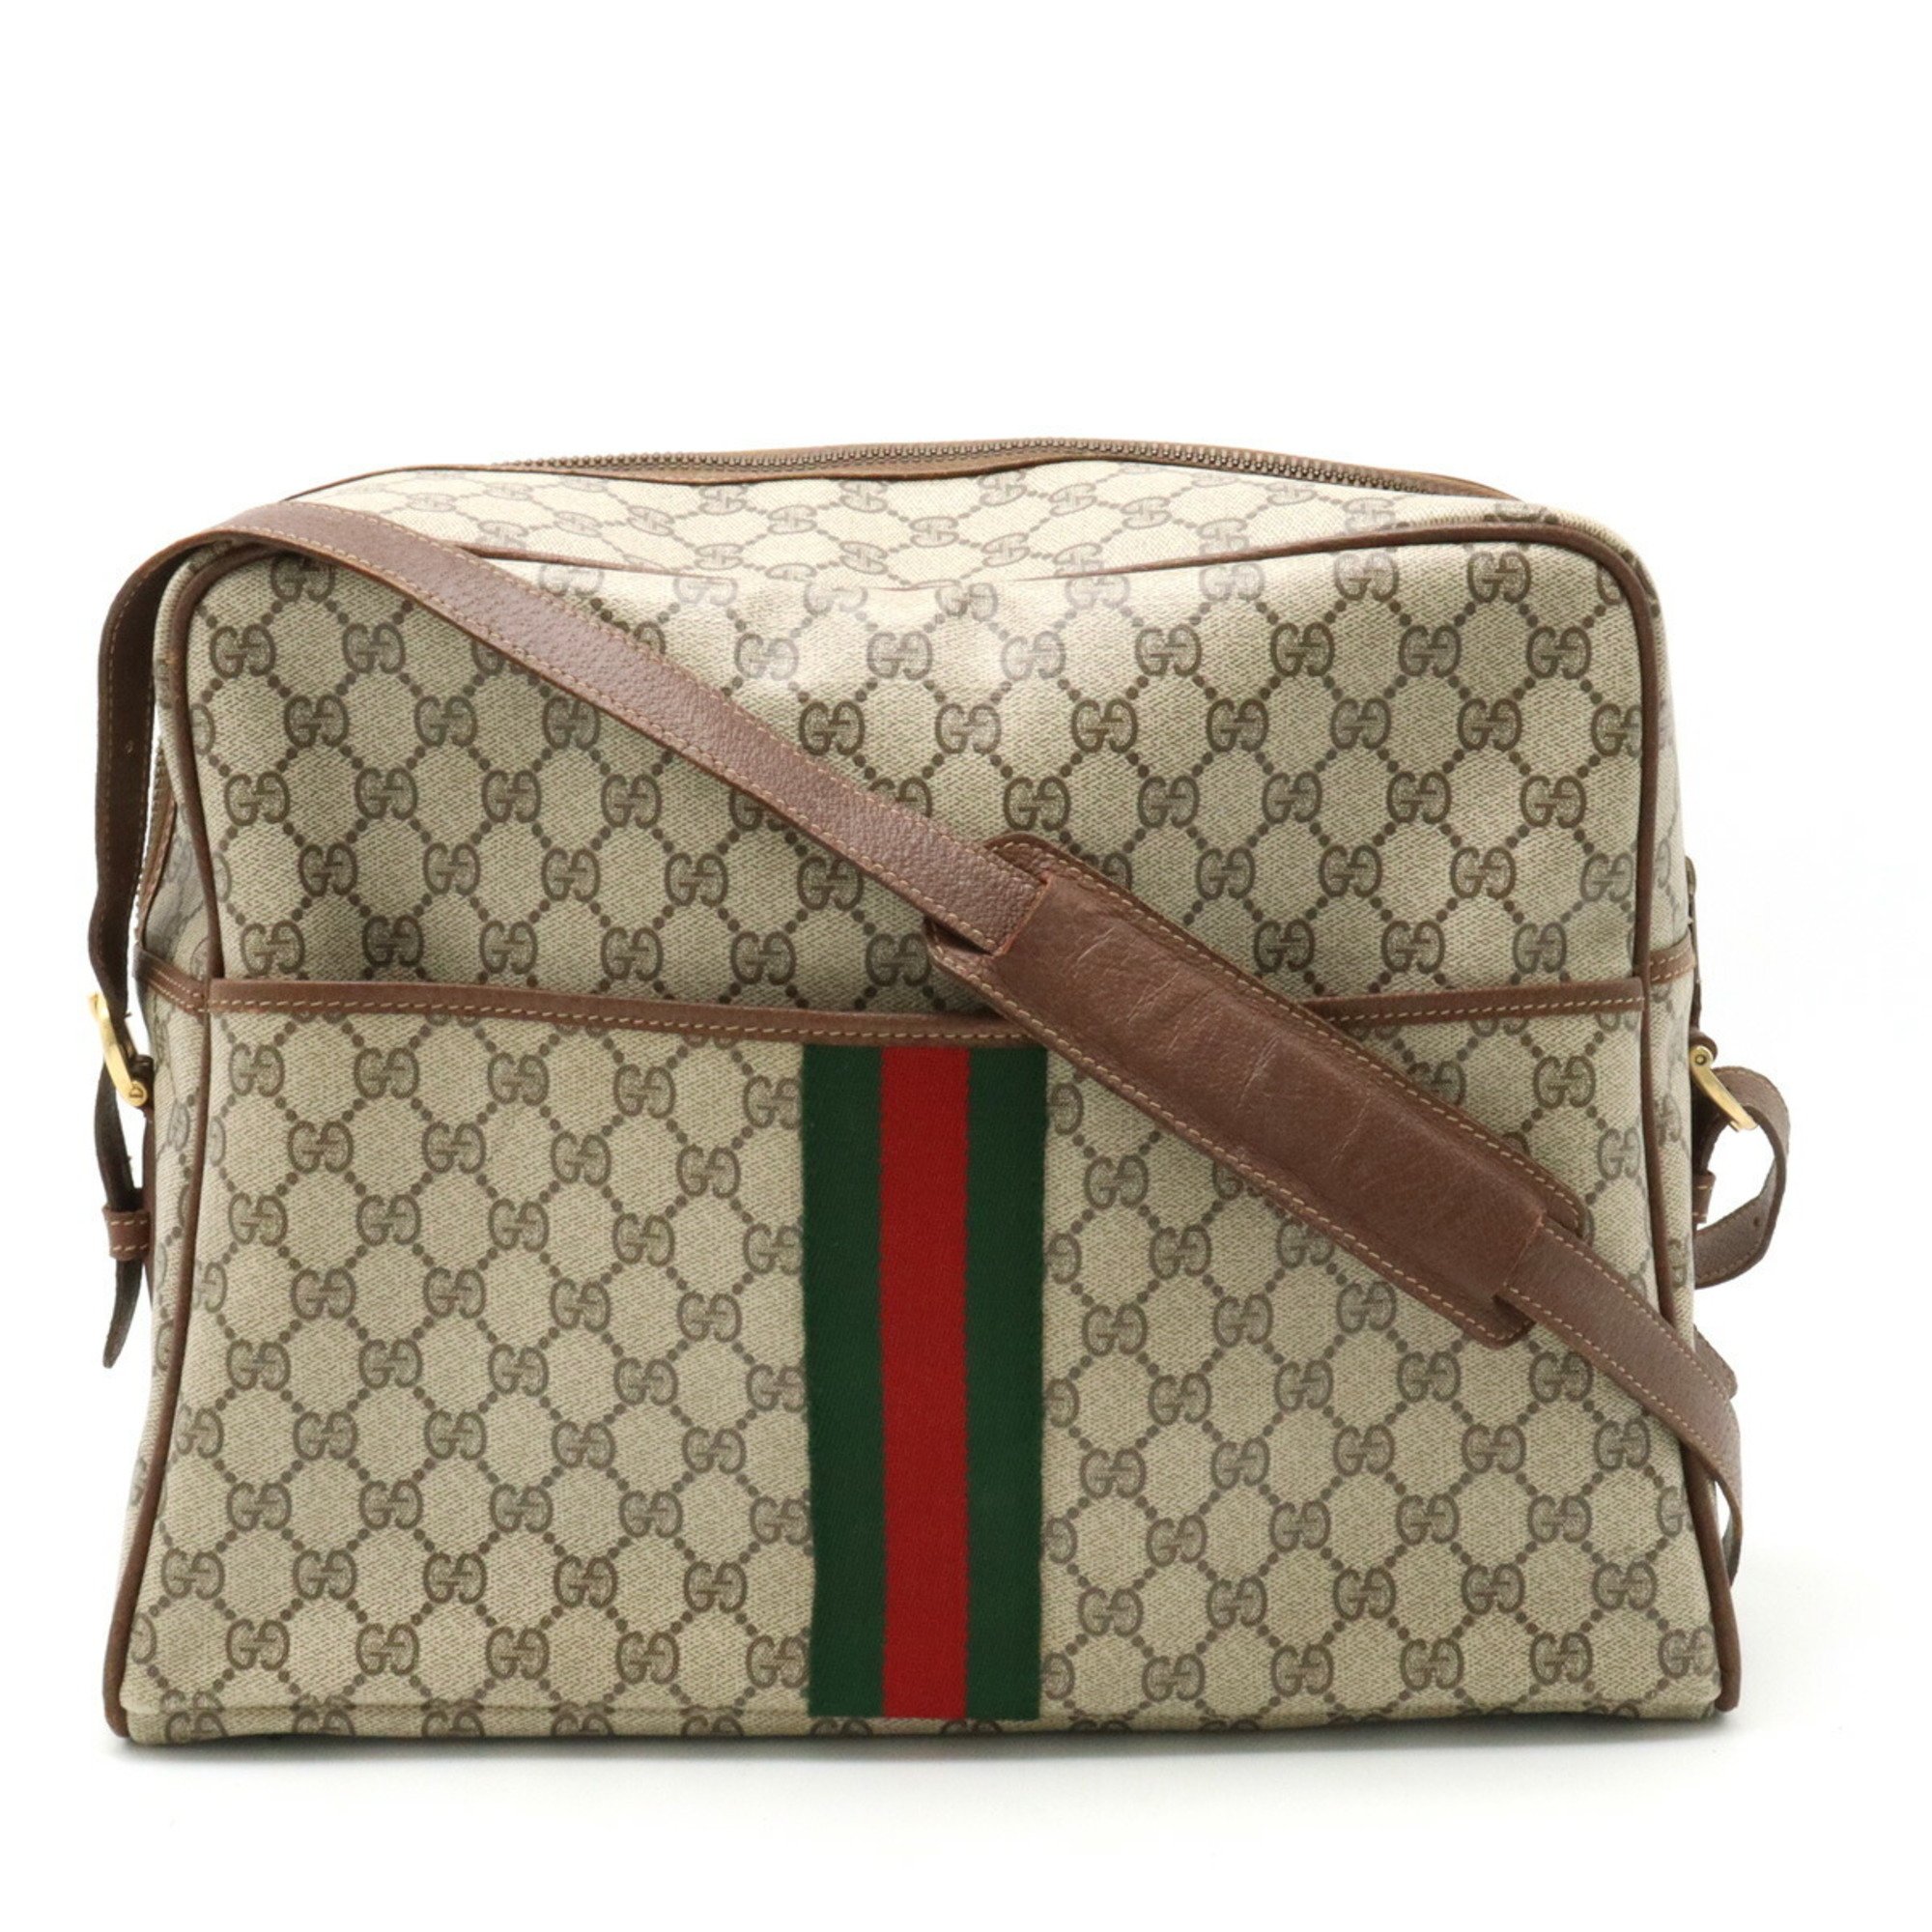 GUCCI Old Gucci GG Plus Sherry Line Shoulder Bag Beige Brown Purchased at San Motoyama